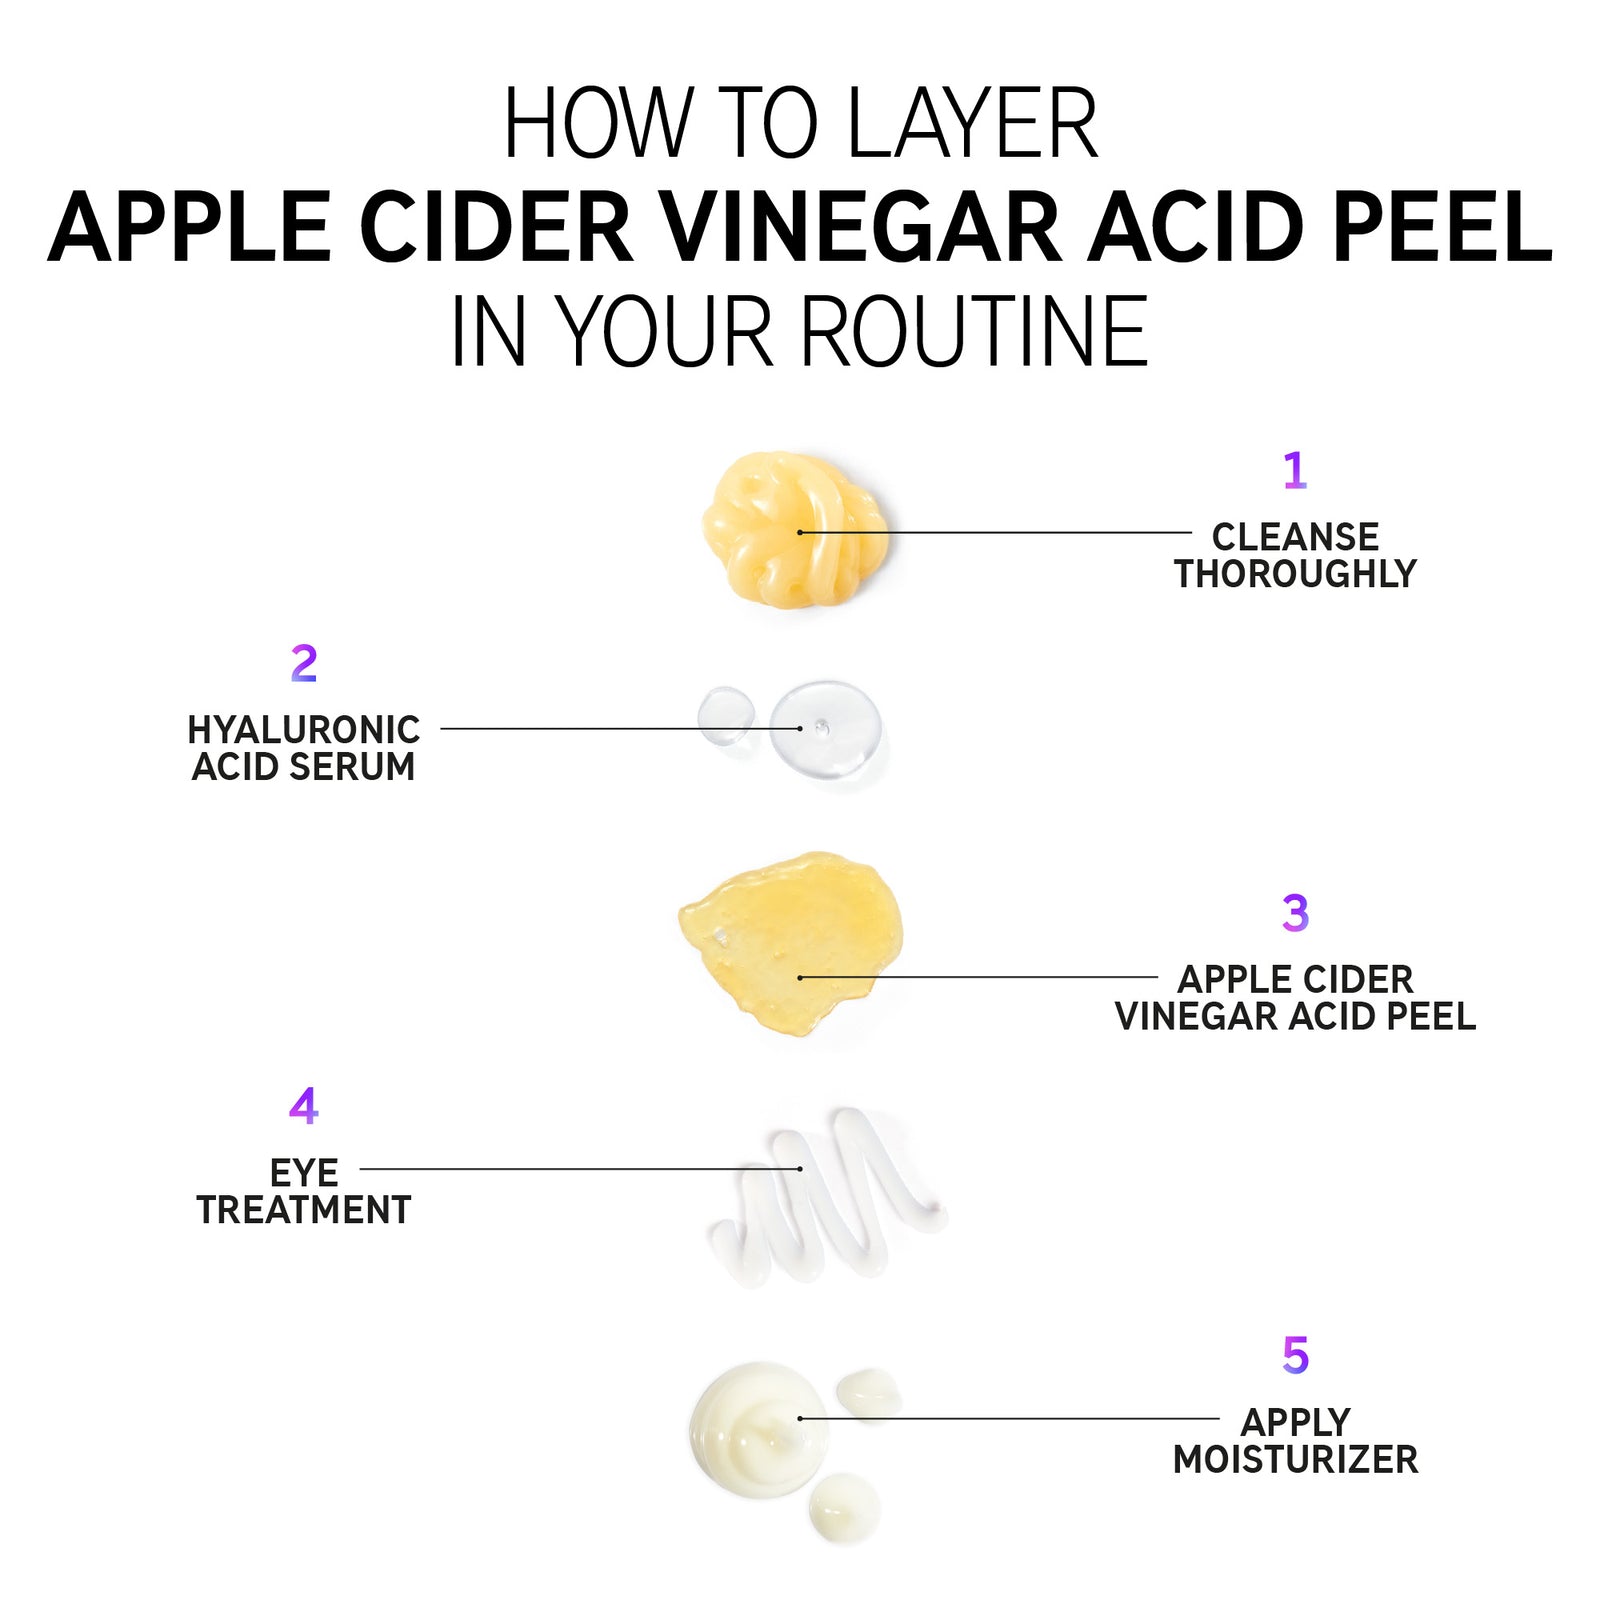 How to layer Apple Cider Vinegar Acid Peel in your routine Step 1. Cleanse thoroughly Step 2. Hyaluronic Acid Serum Step 3. Apple Cider Vinegar Acid Peel Step 4. Eye treatment Step 5. Eye treatment Step 6. Apply Moisturiser